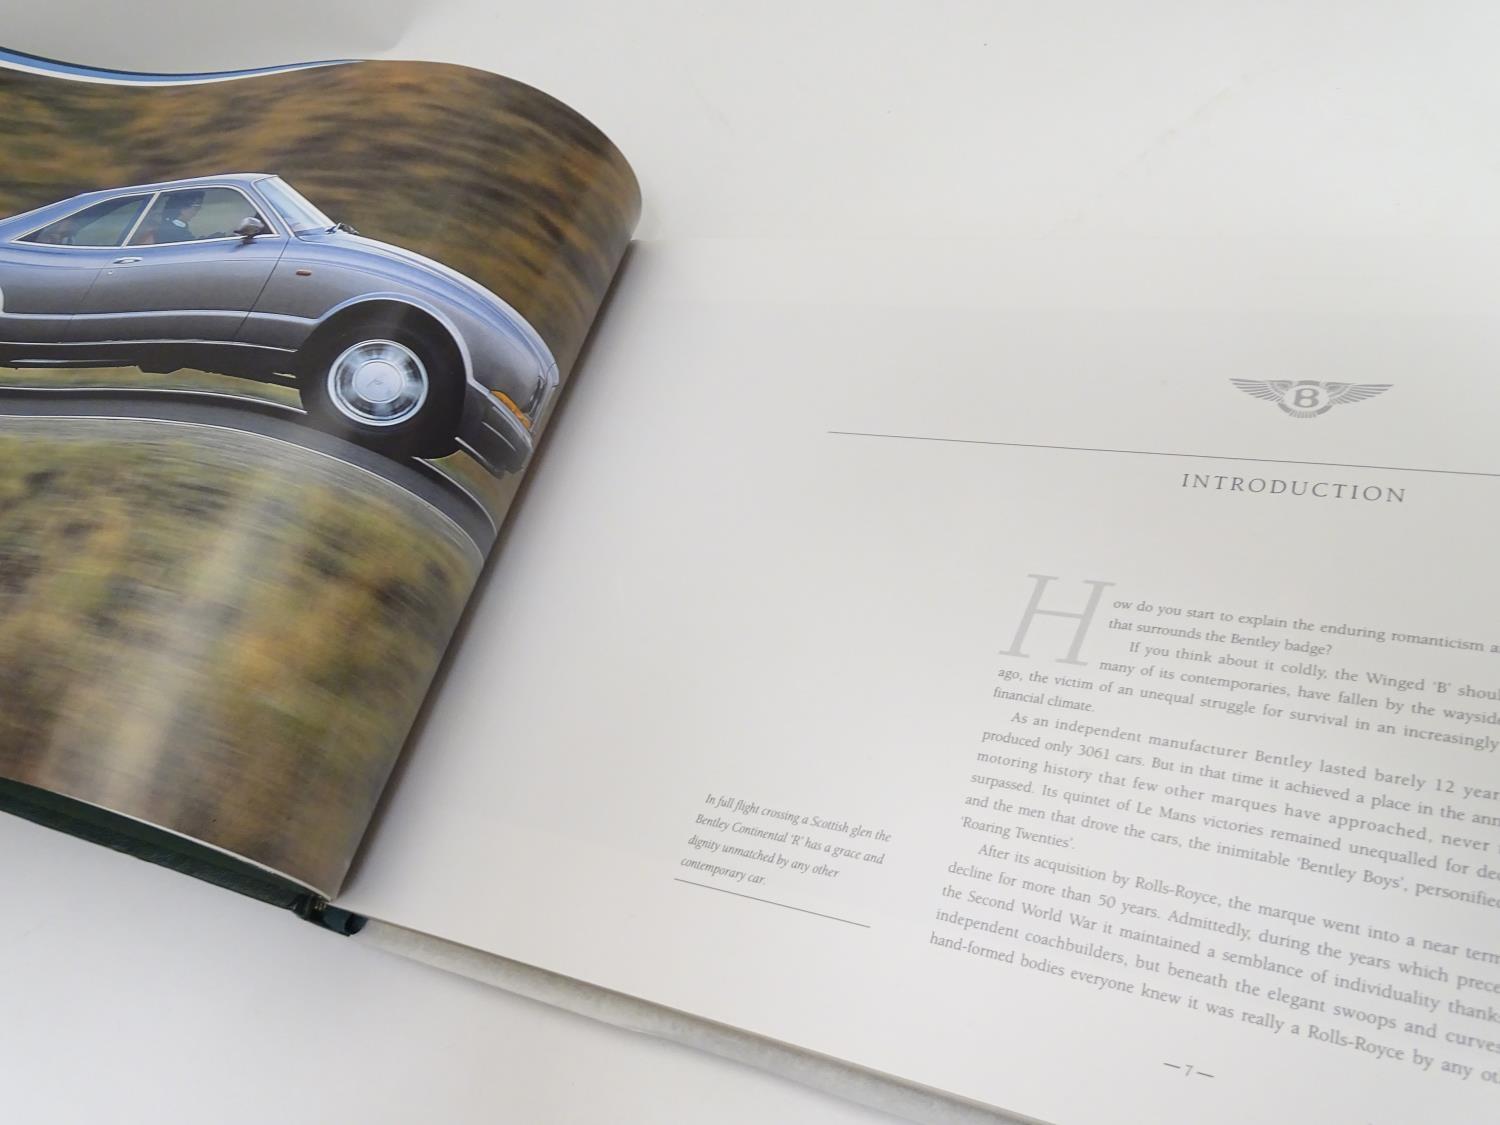 Book : Bentley Continental R, by Ian Adcock, pub. Osprey Automotive 1992 First edition, bound in - Image 7 of 9